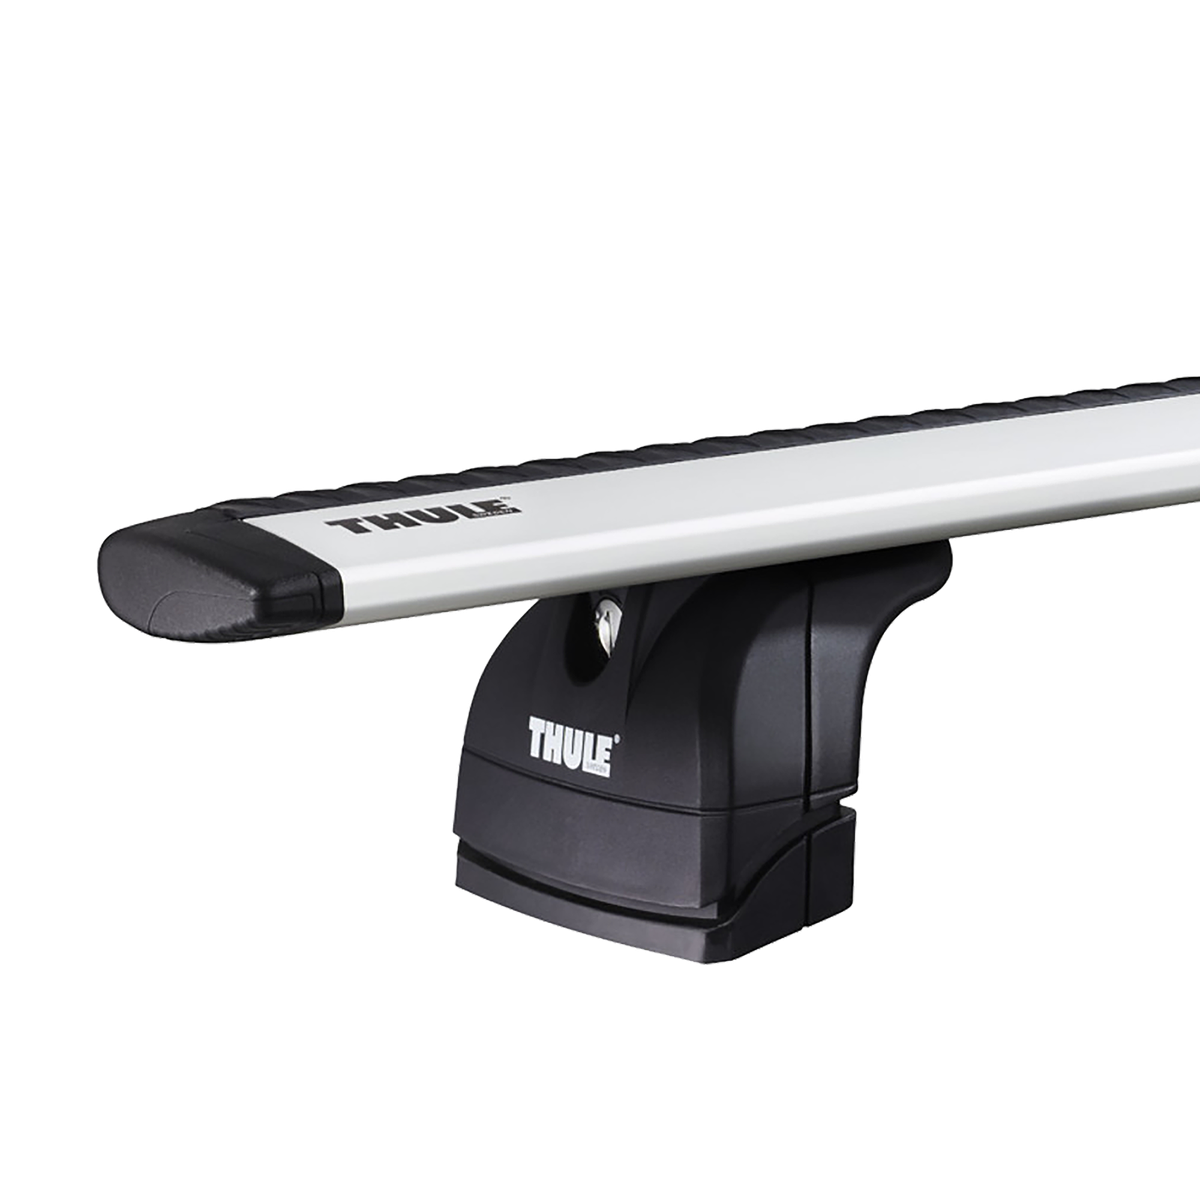 Thule Rapid System 753, 7531 foot for vehicles